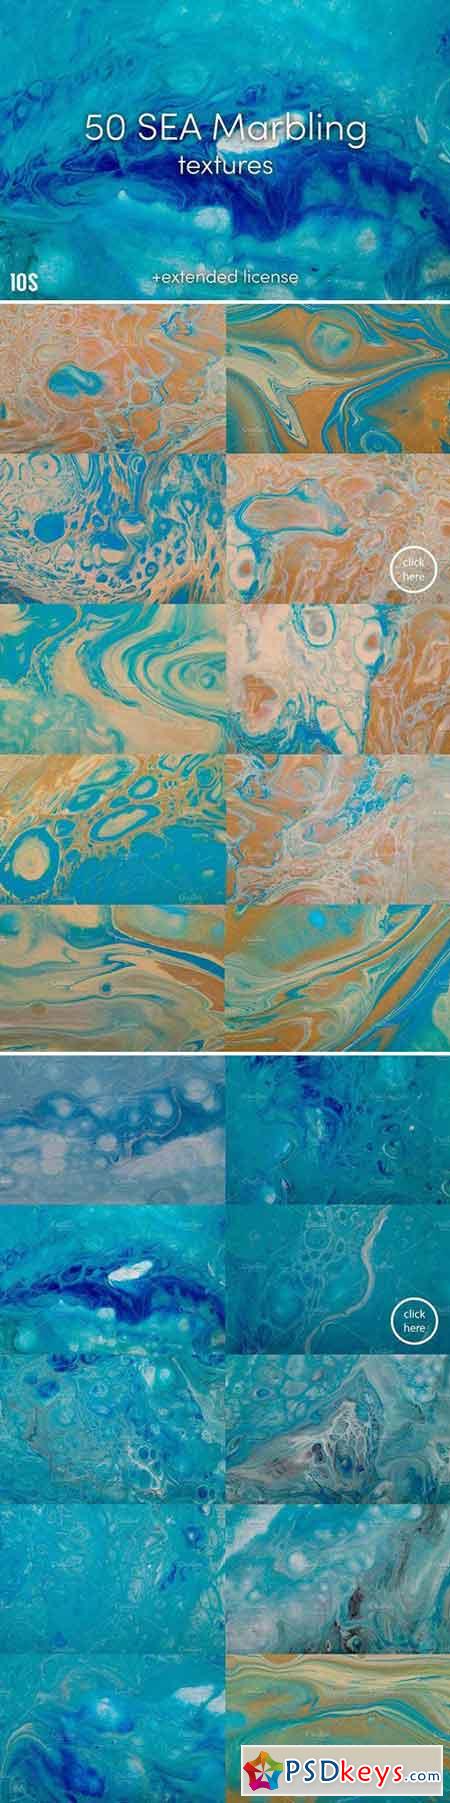 50 Sea marbling textures 1567594